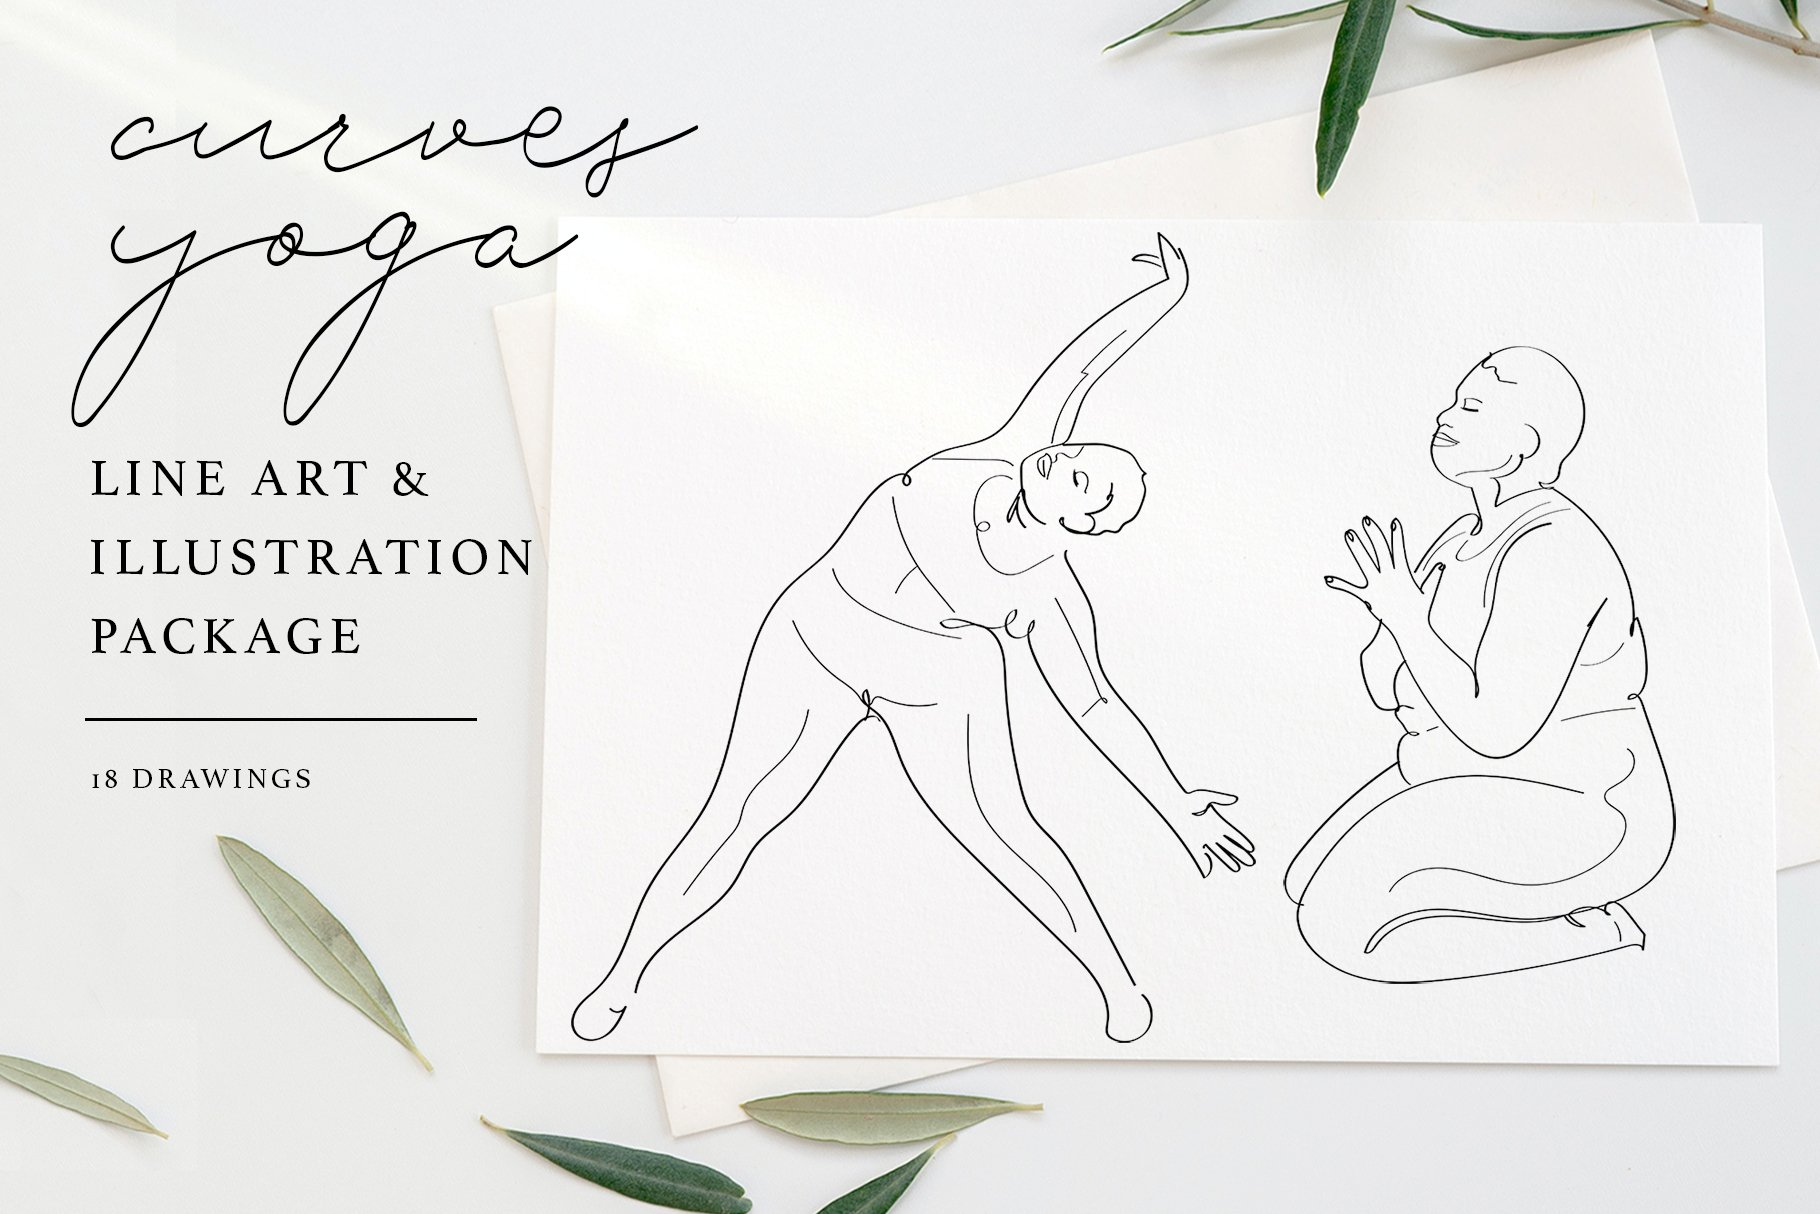 Curves Yoga Line Art and Illustration Package